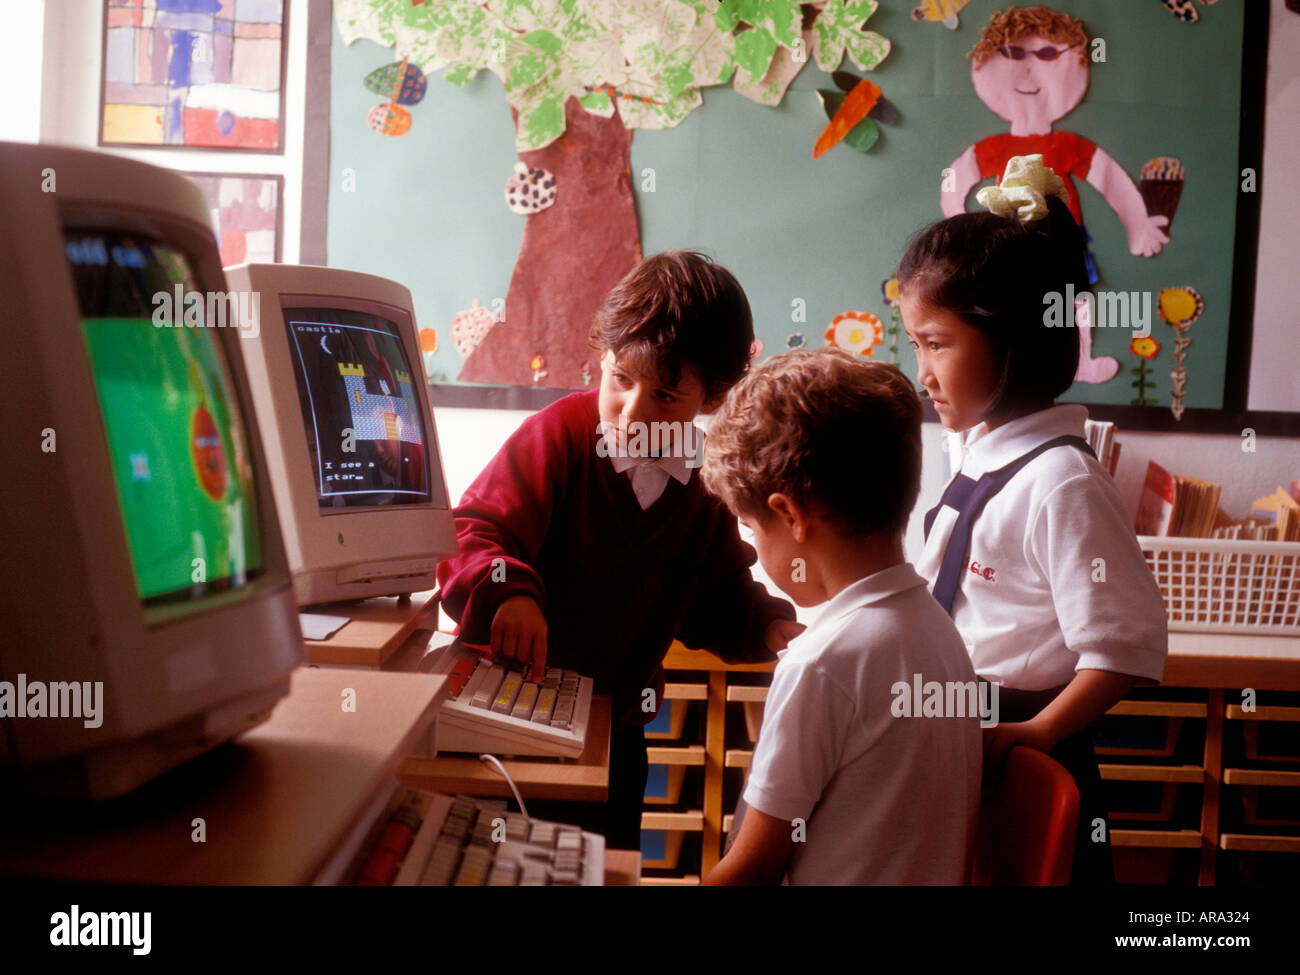 1990’s COMPUTER CLASS INFANT SCHOOL EARLY 90’s  COMPUTER SCREENS Group of 3 infant school children aged 4 to 6 years in early learning computer class Stock Photo